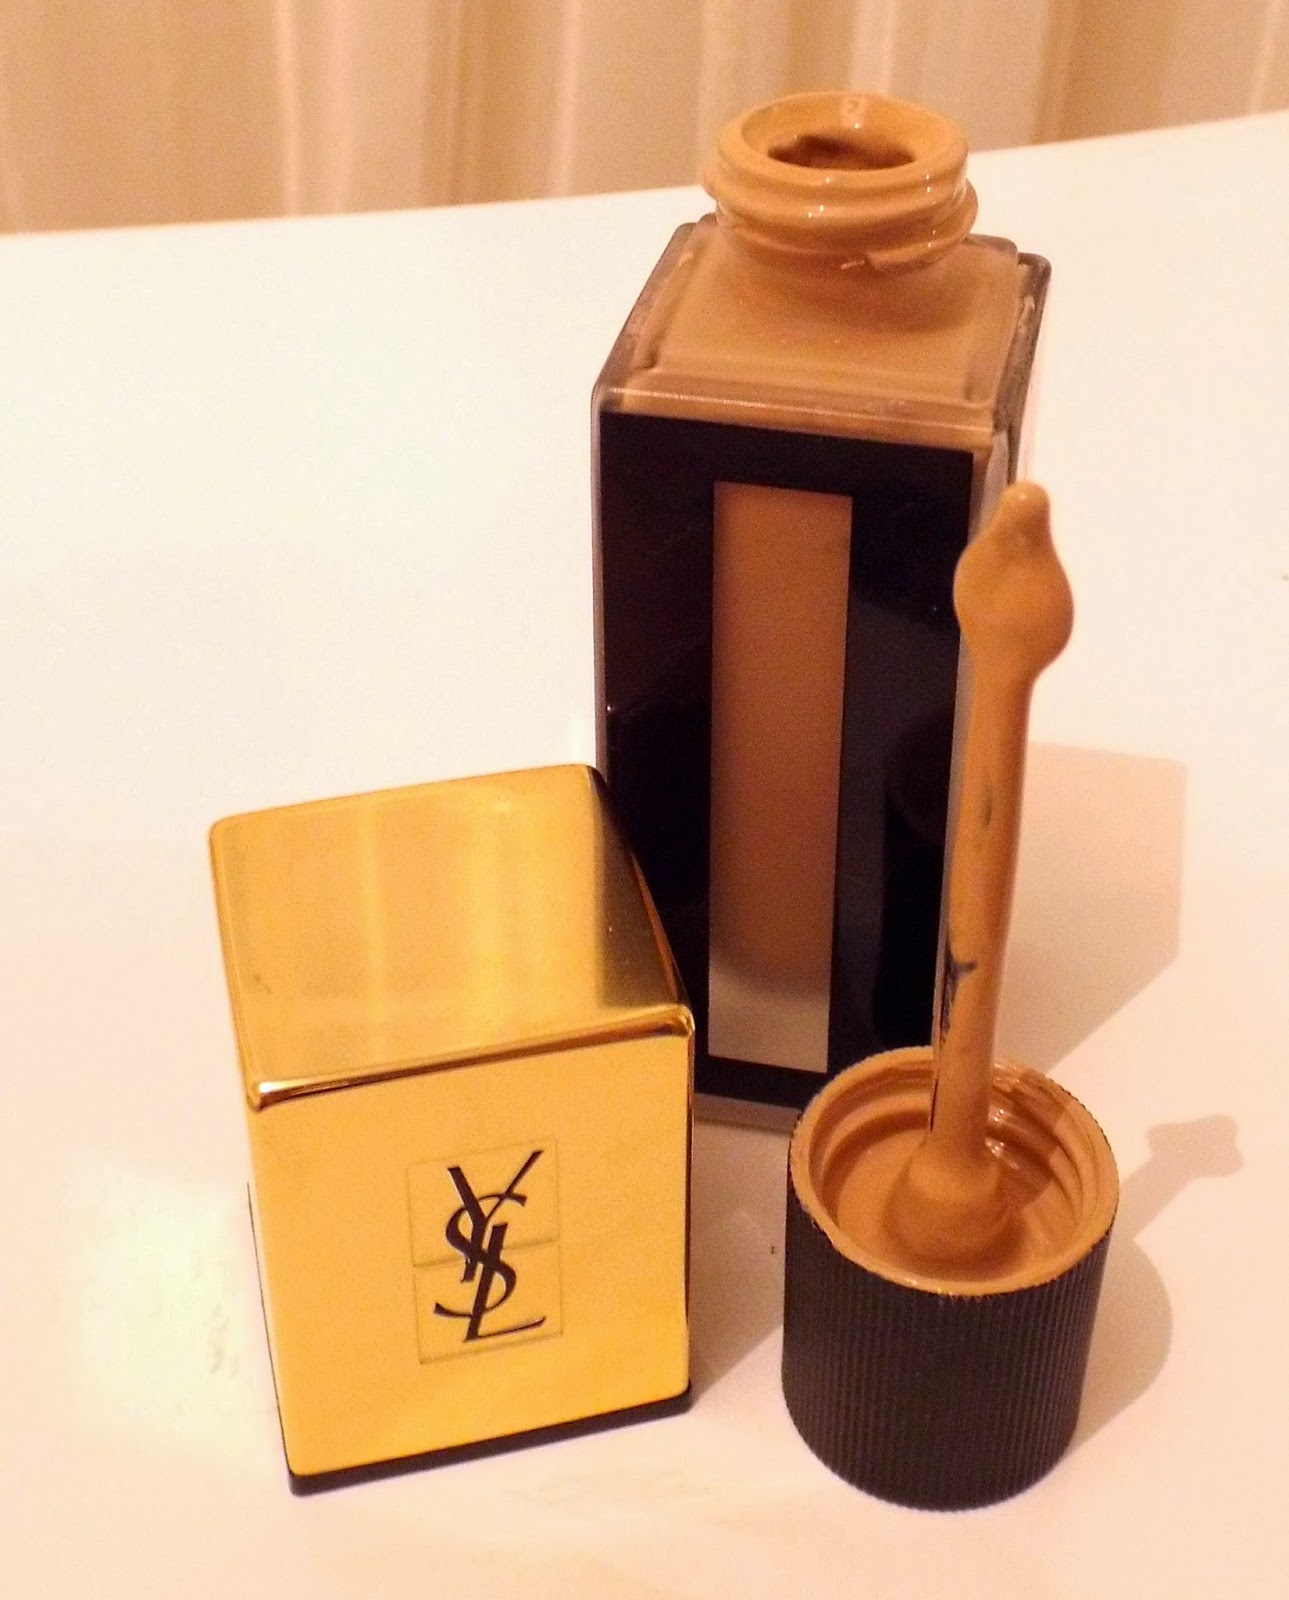 YSL – Fusion Ink Foundation - Review